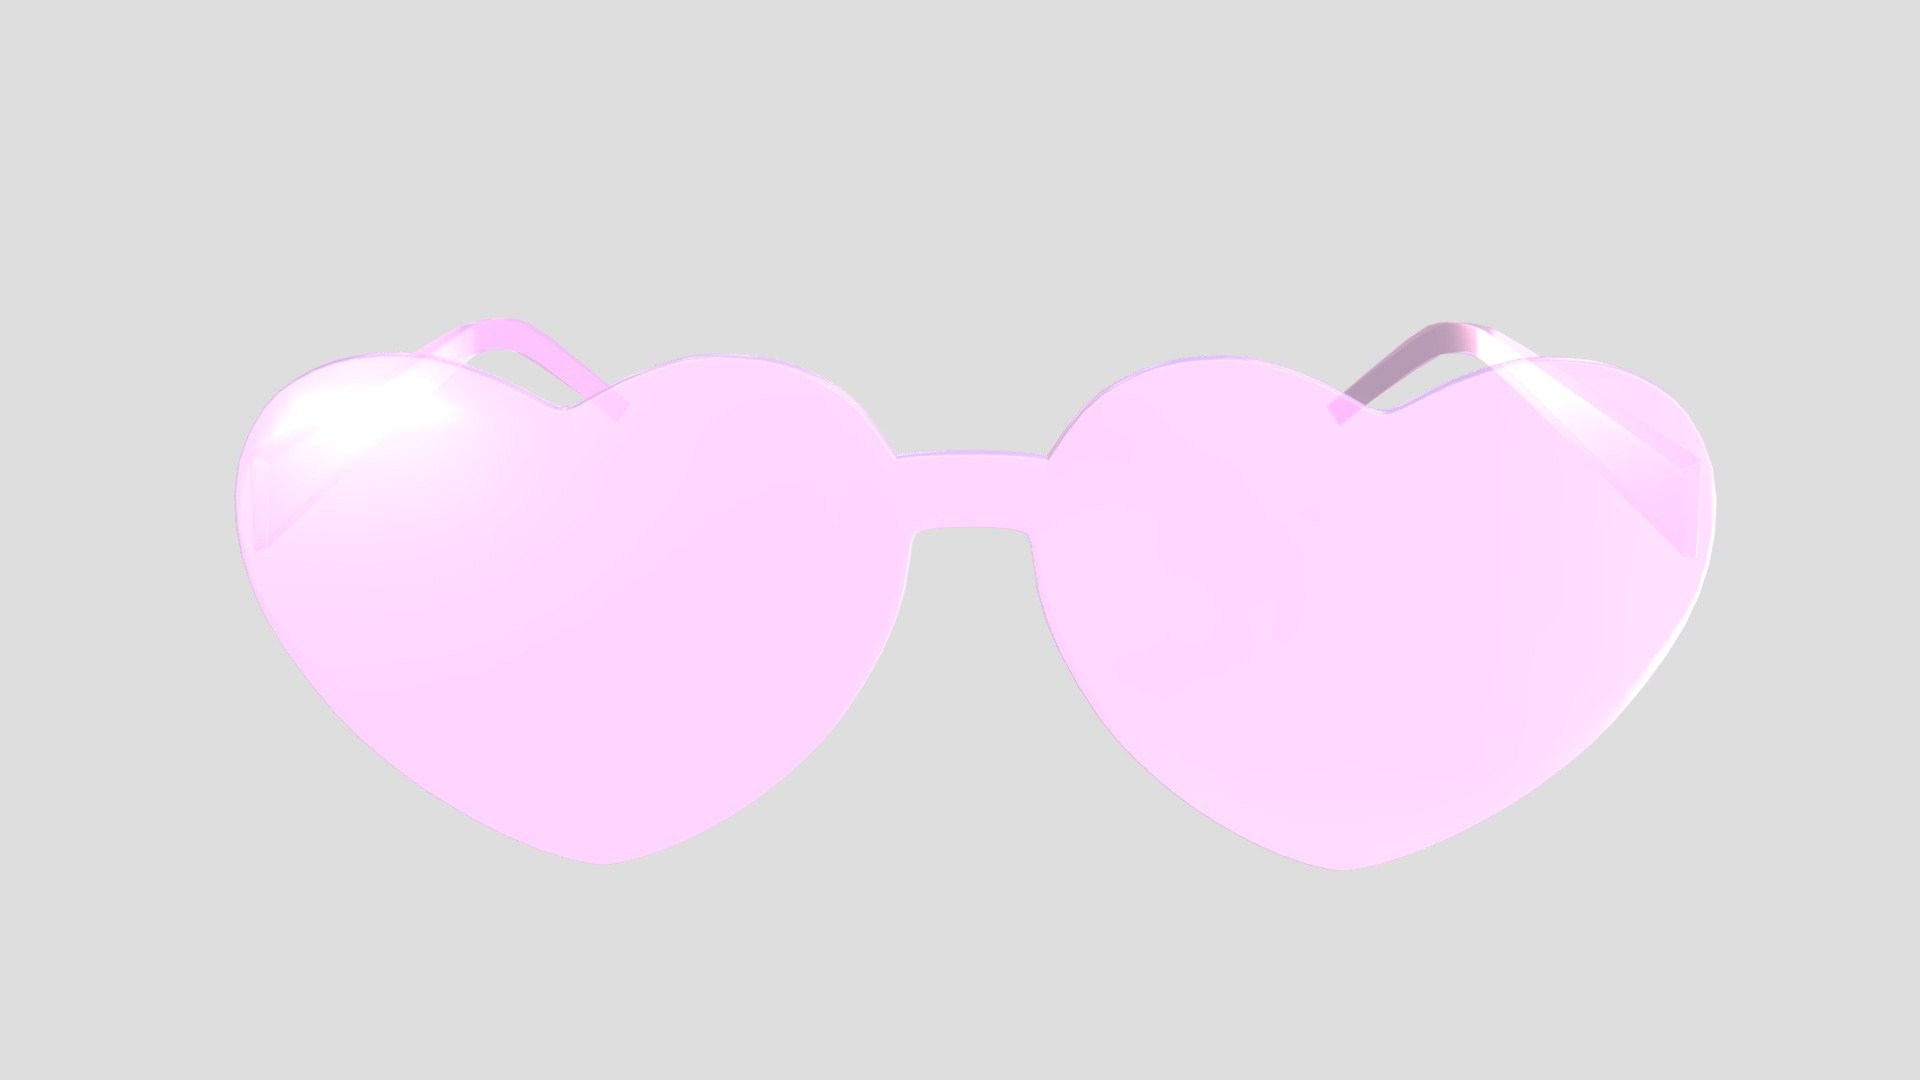 Format FBX file size : 150KB

Click on the link to see more models : https://sketchfab.com/GbehnamG/store

If you need customized 3d models , feel free to contact at: mr.gbehnamg@yahoo.com - Pink Heart Glasses - Buy Royalty Free 3D model by BehNaM (@GbehnamG) 3d model